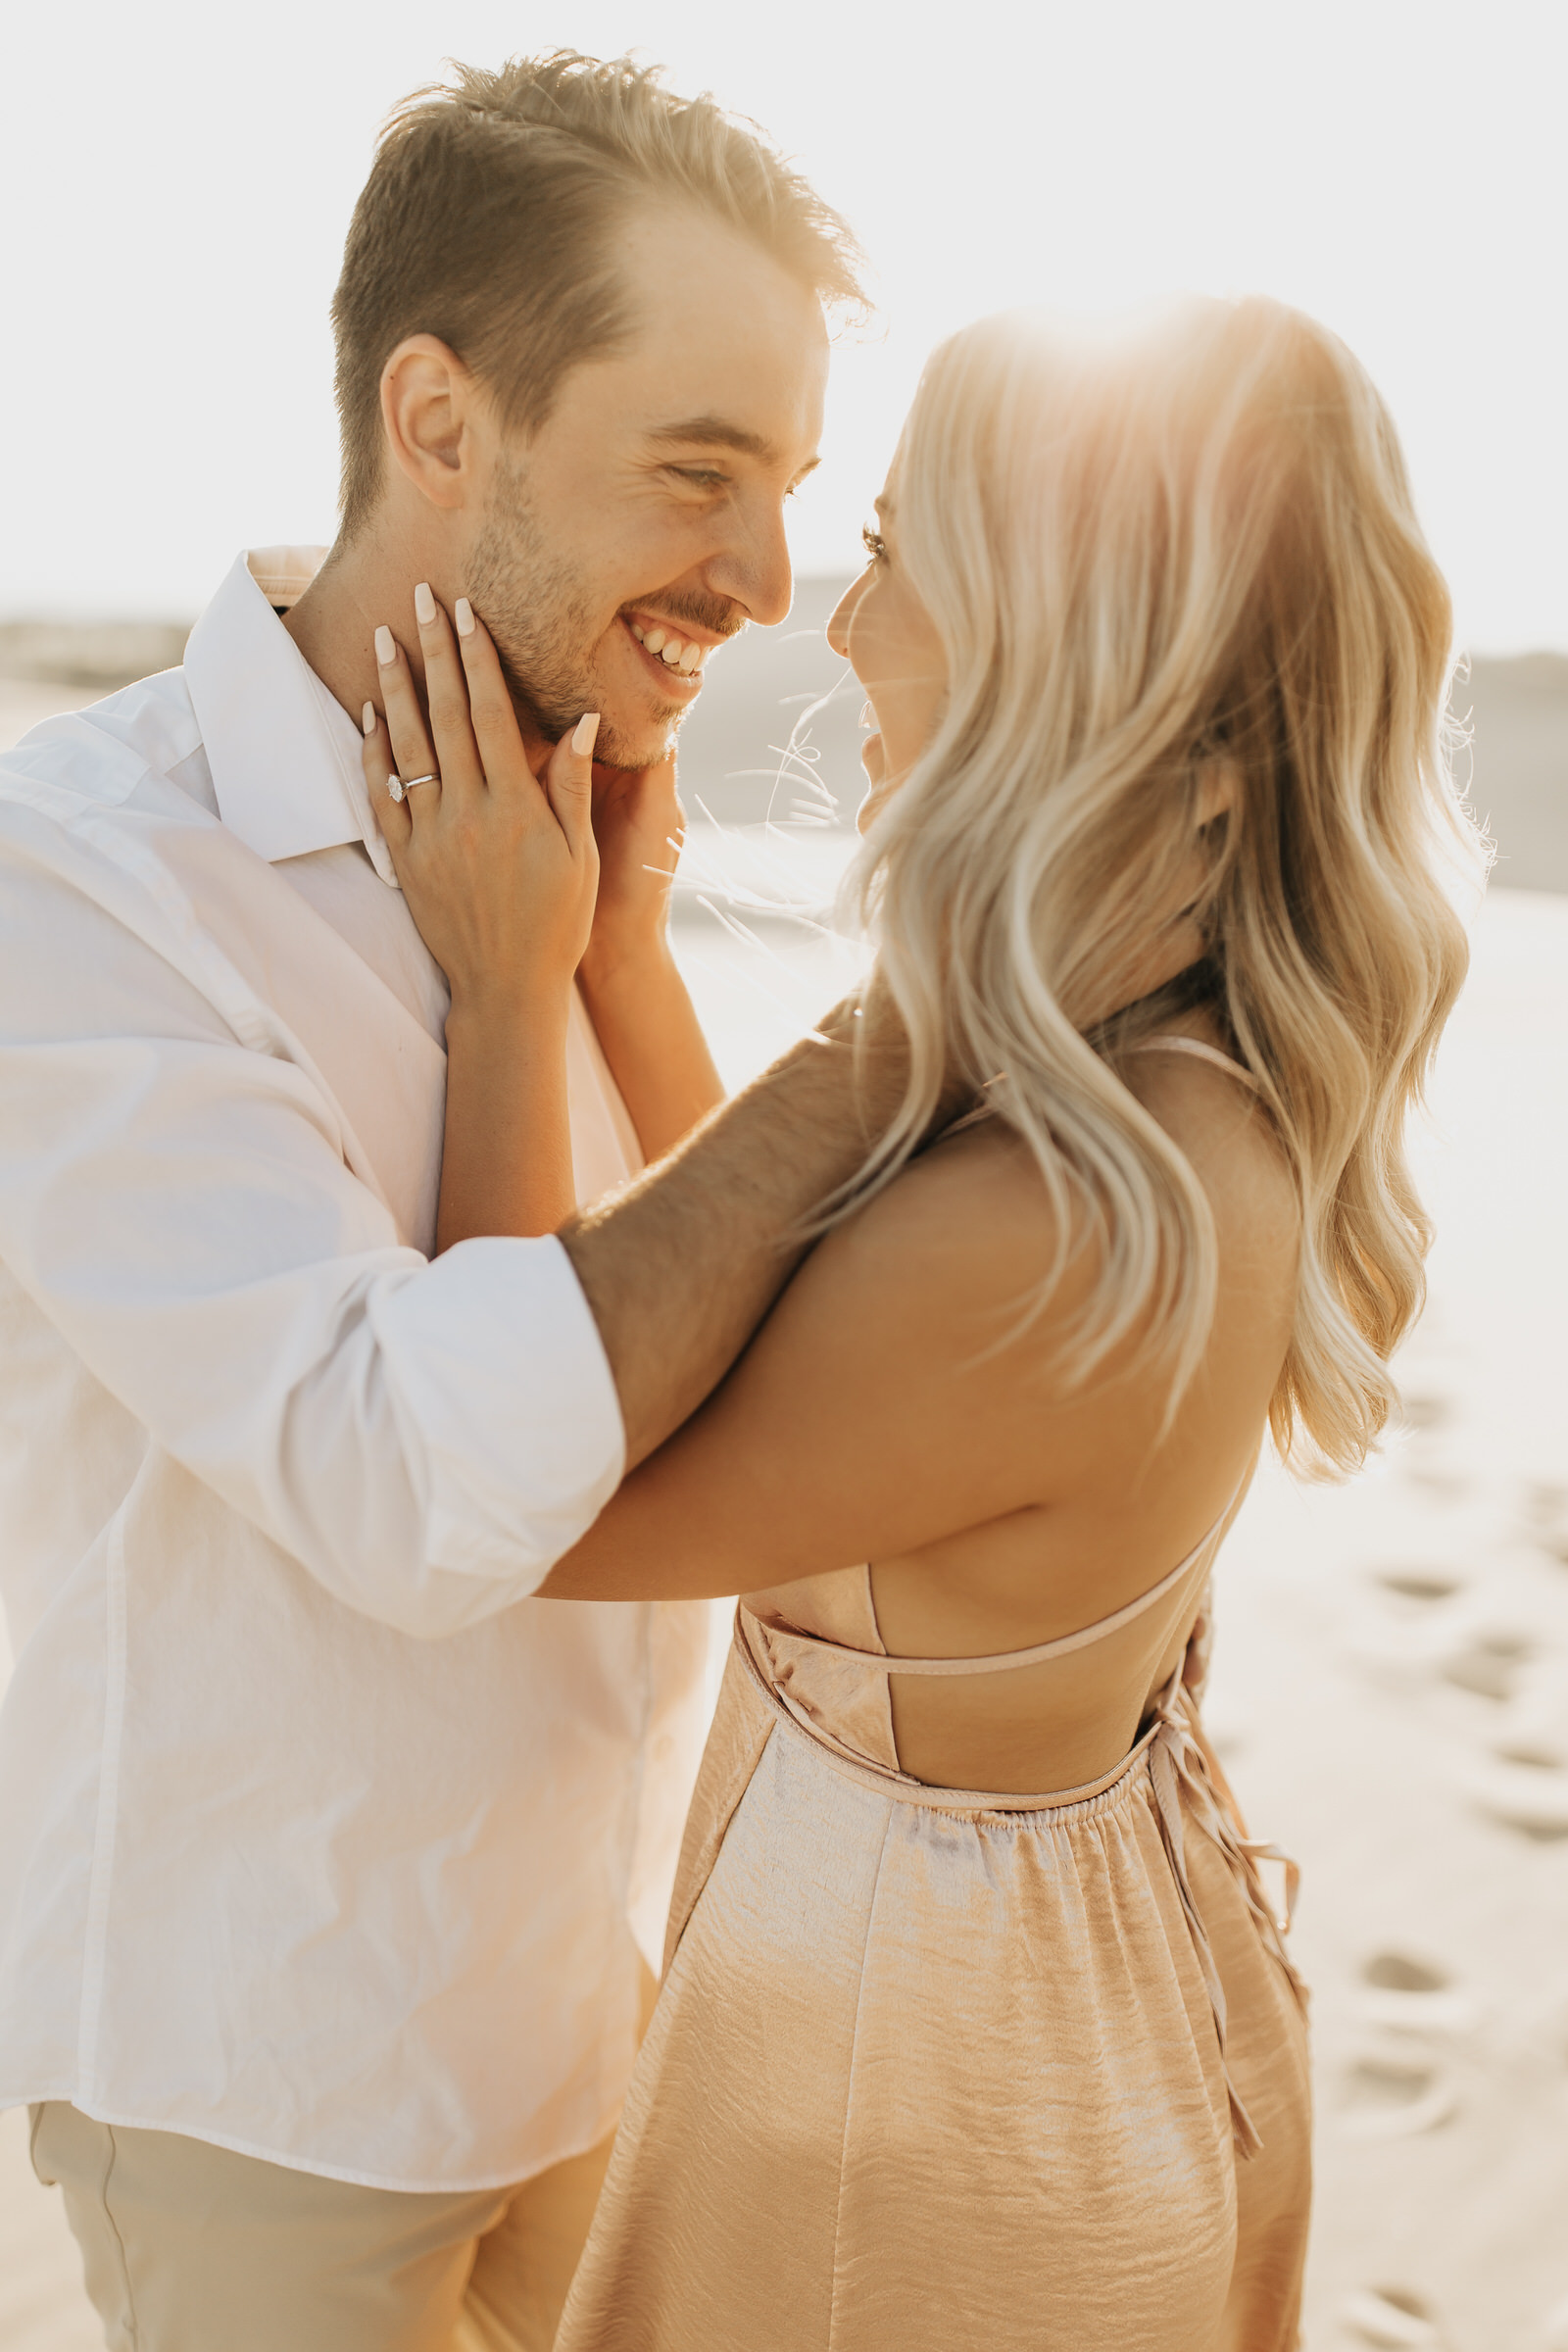 Silver Lake Sand Dune Engagement by Heather Michelle Photo